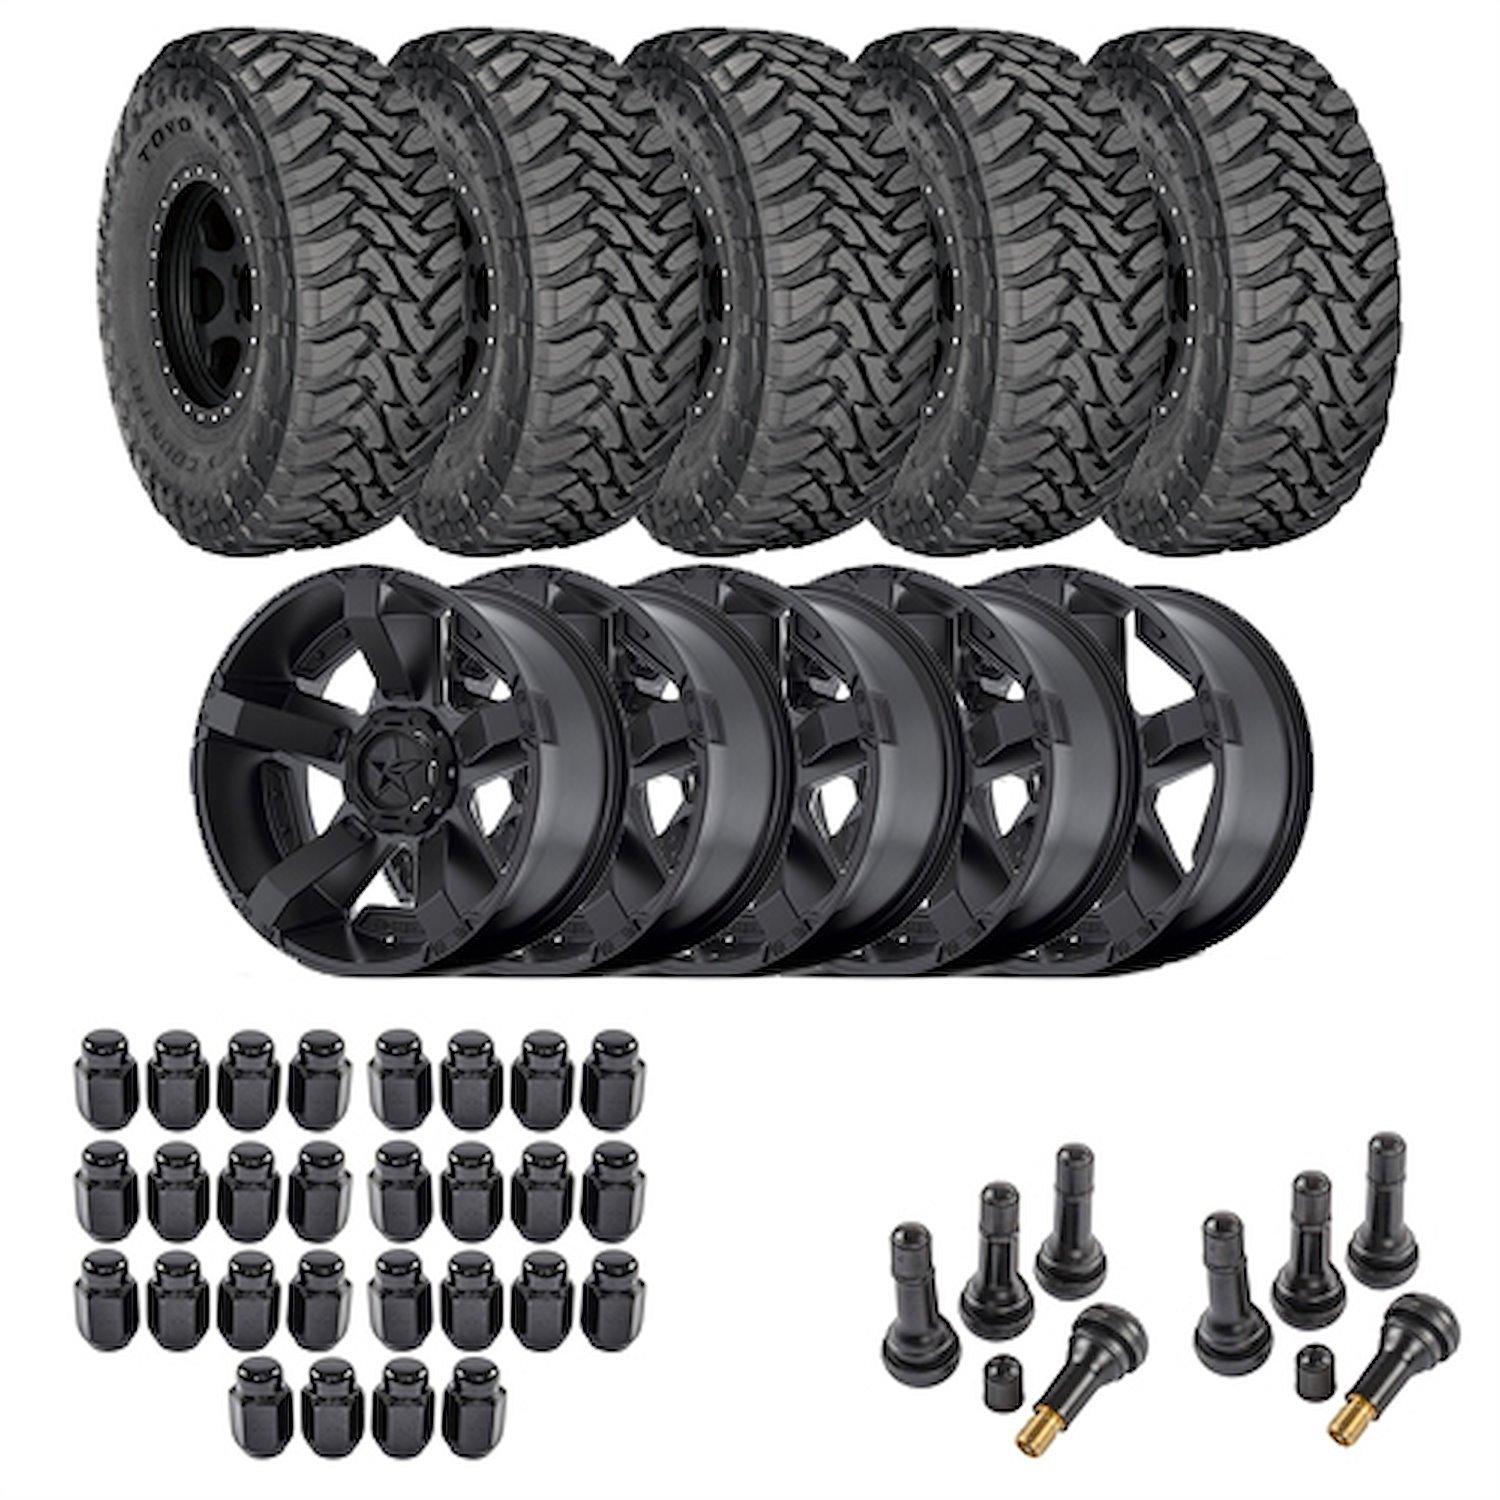 Wheel and Tire Kit for 1987-2006 Jeep Wrangler/1984-2001